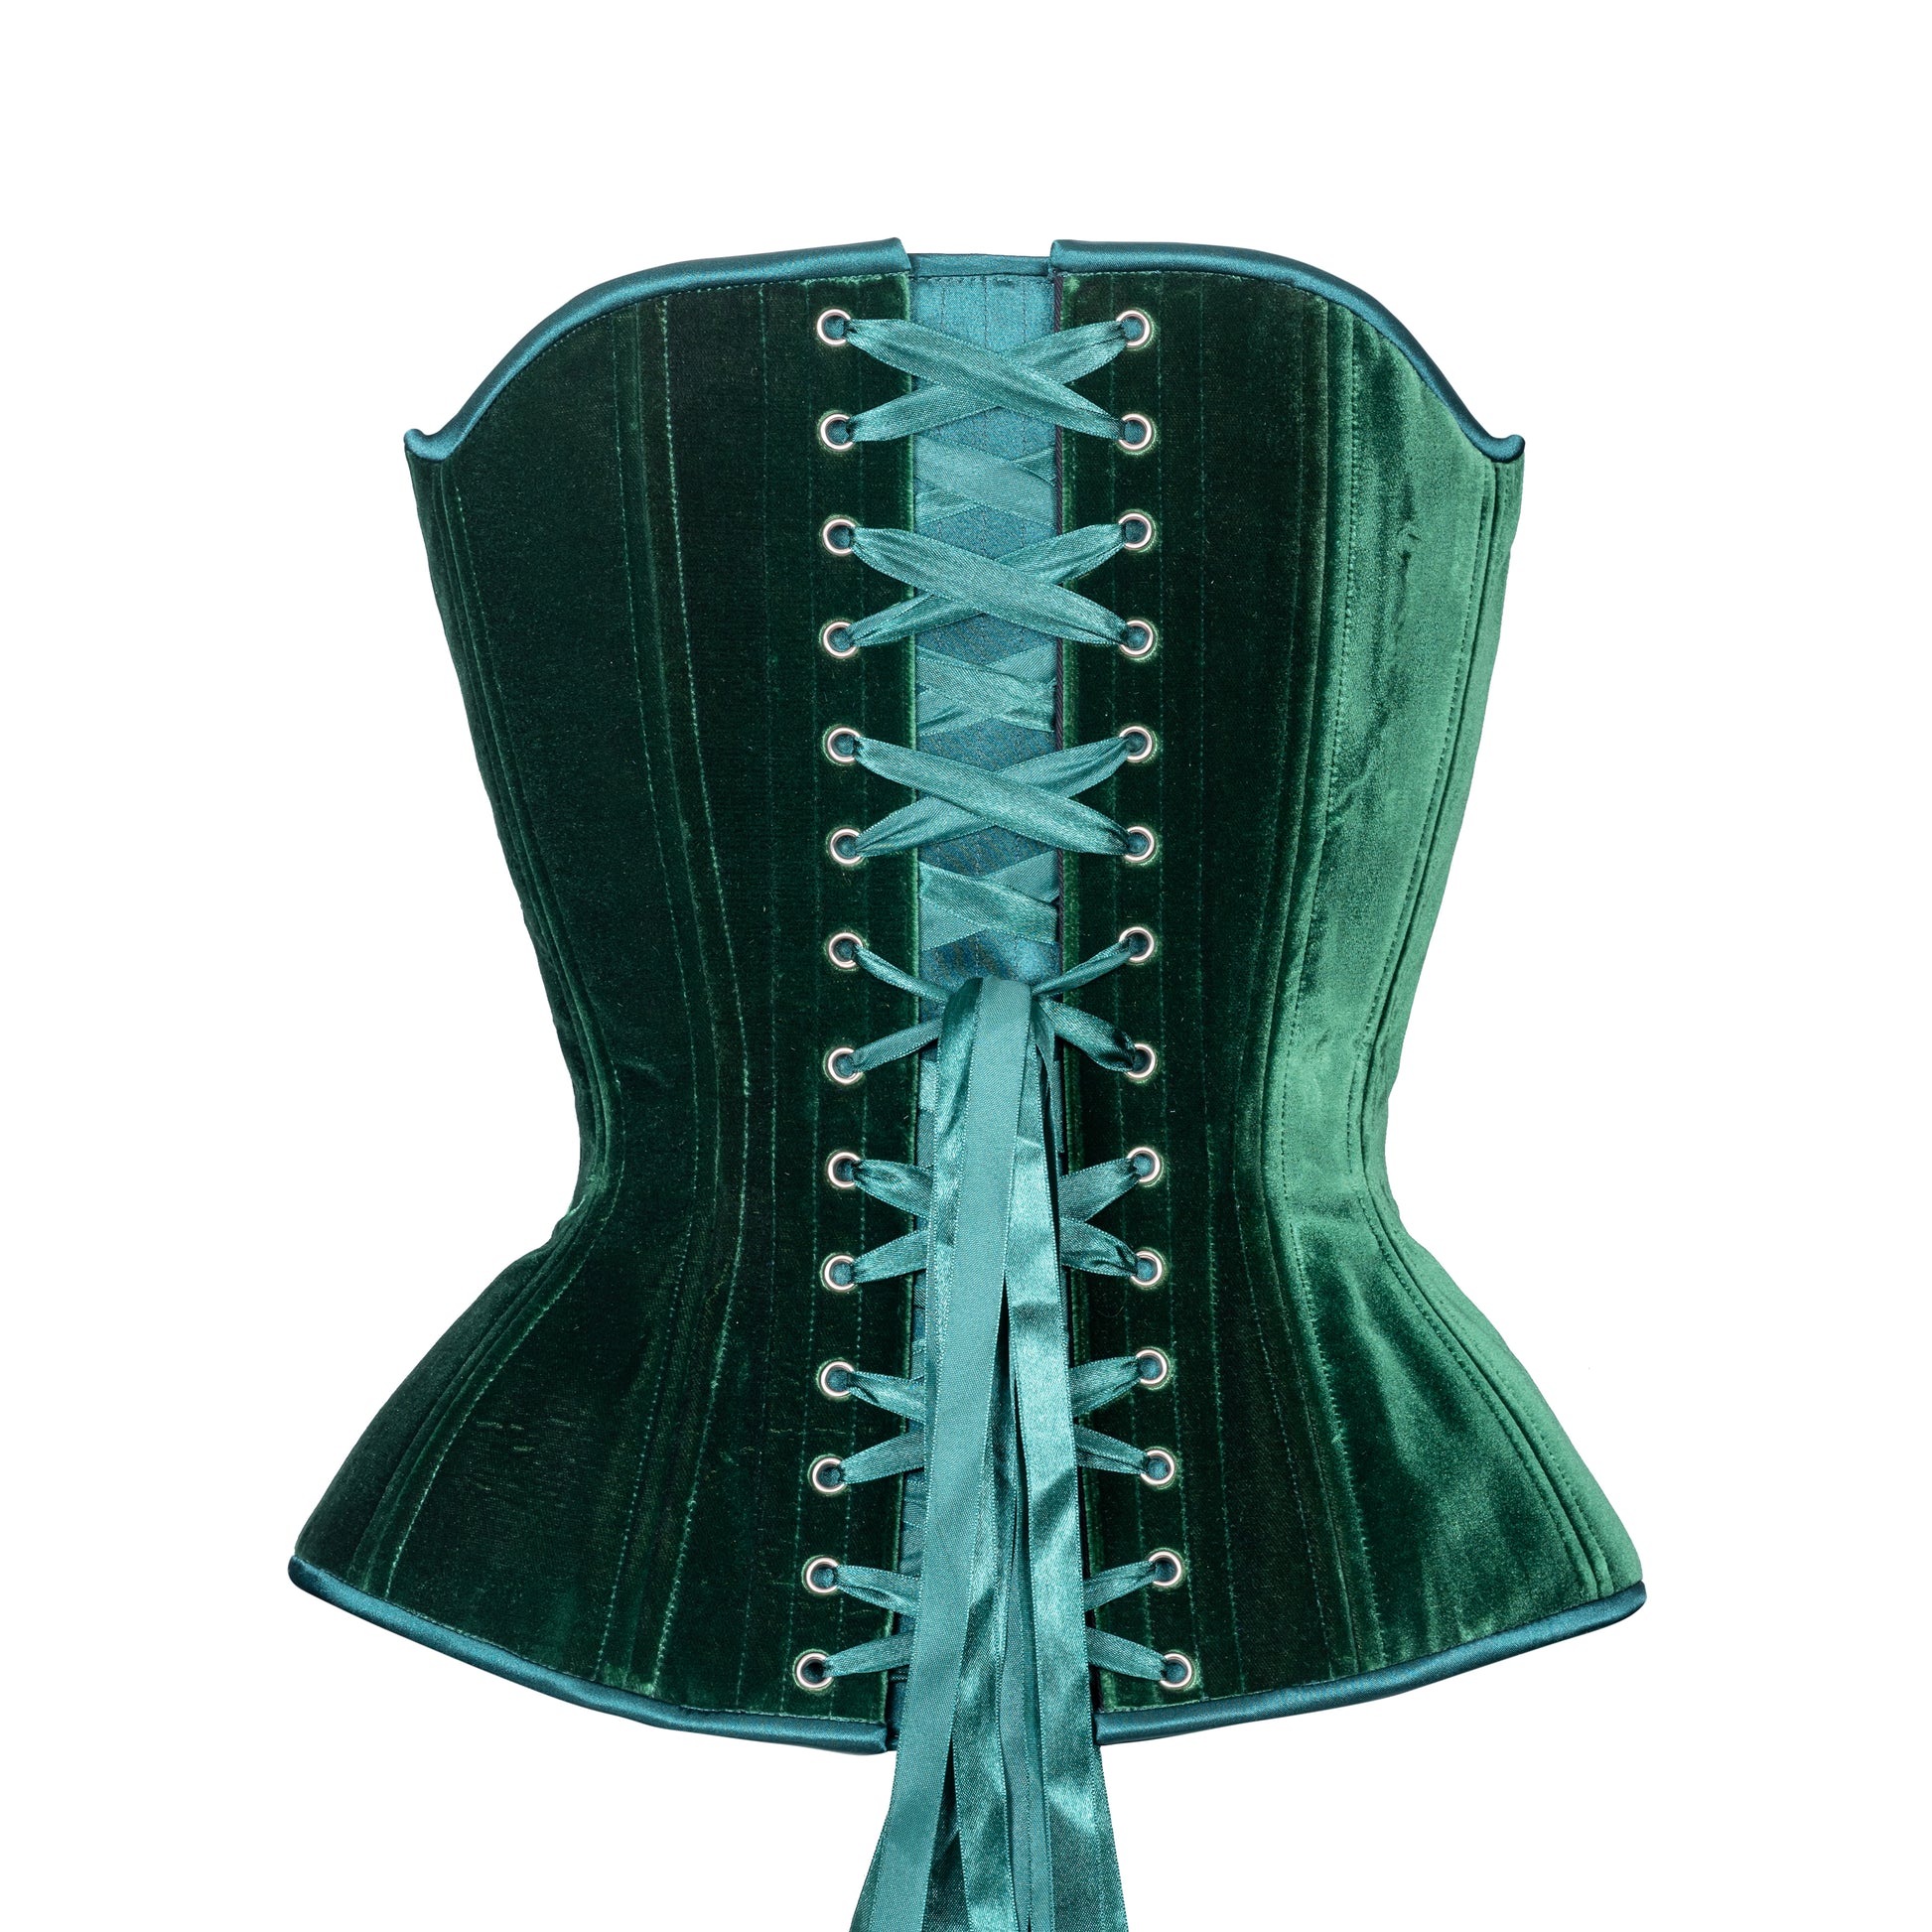 Green Velvet Corset with Leather Strips Plus Size Gothic Waist Trainer  Overbust